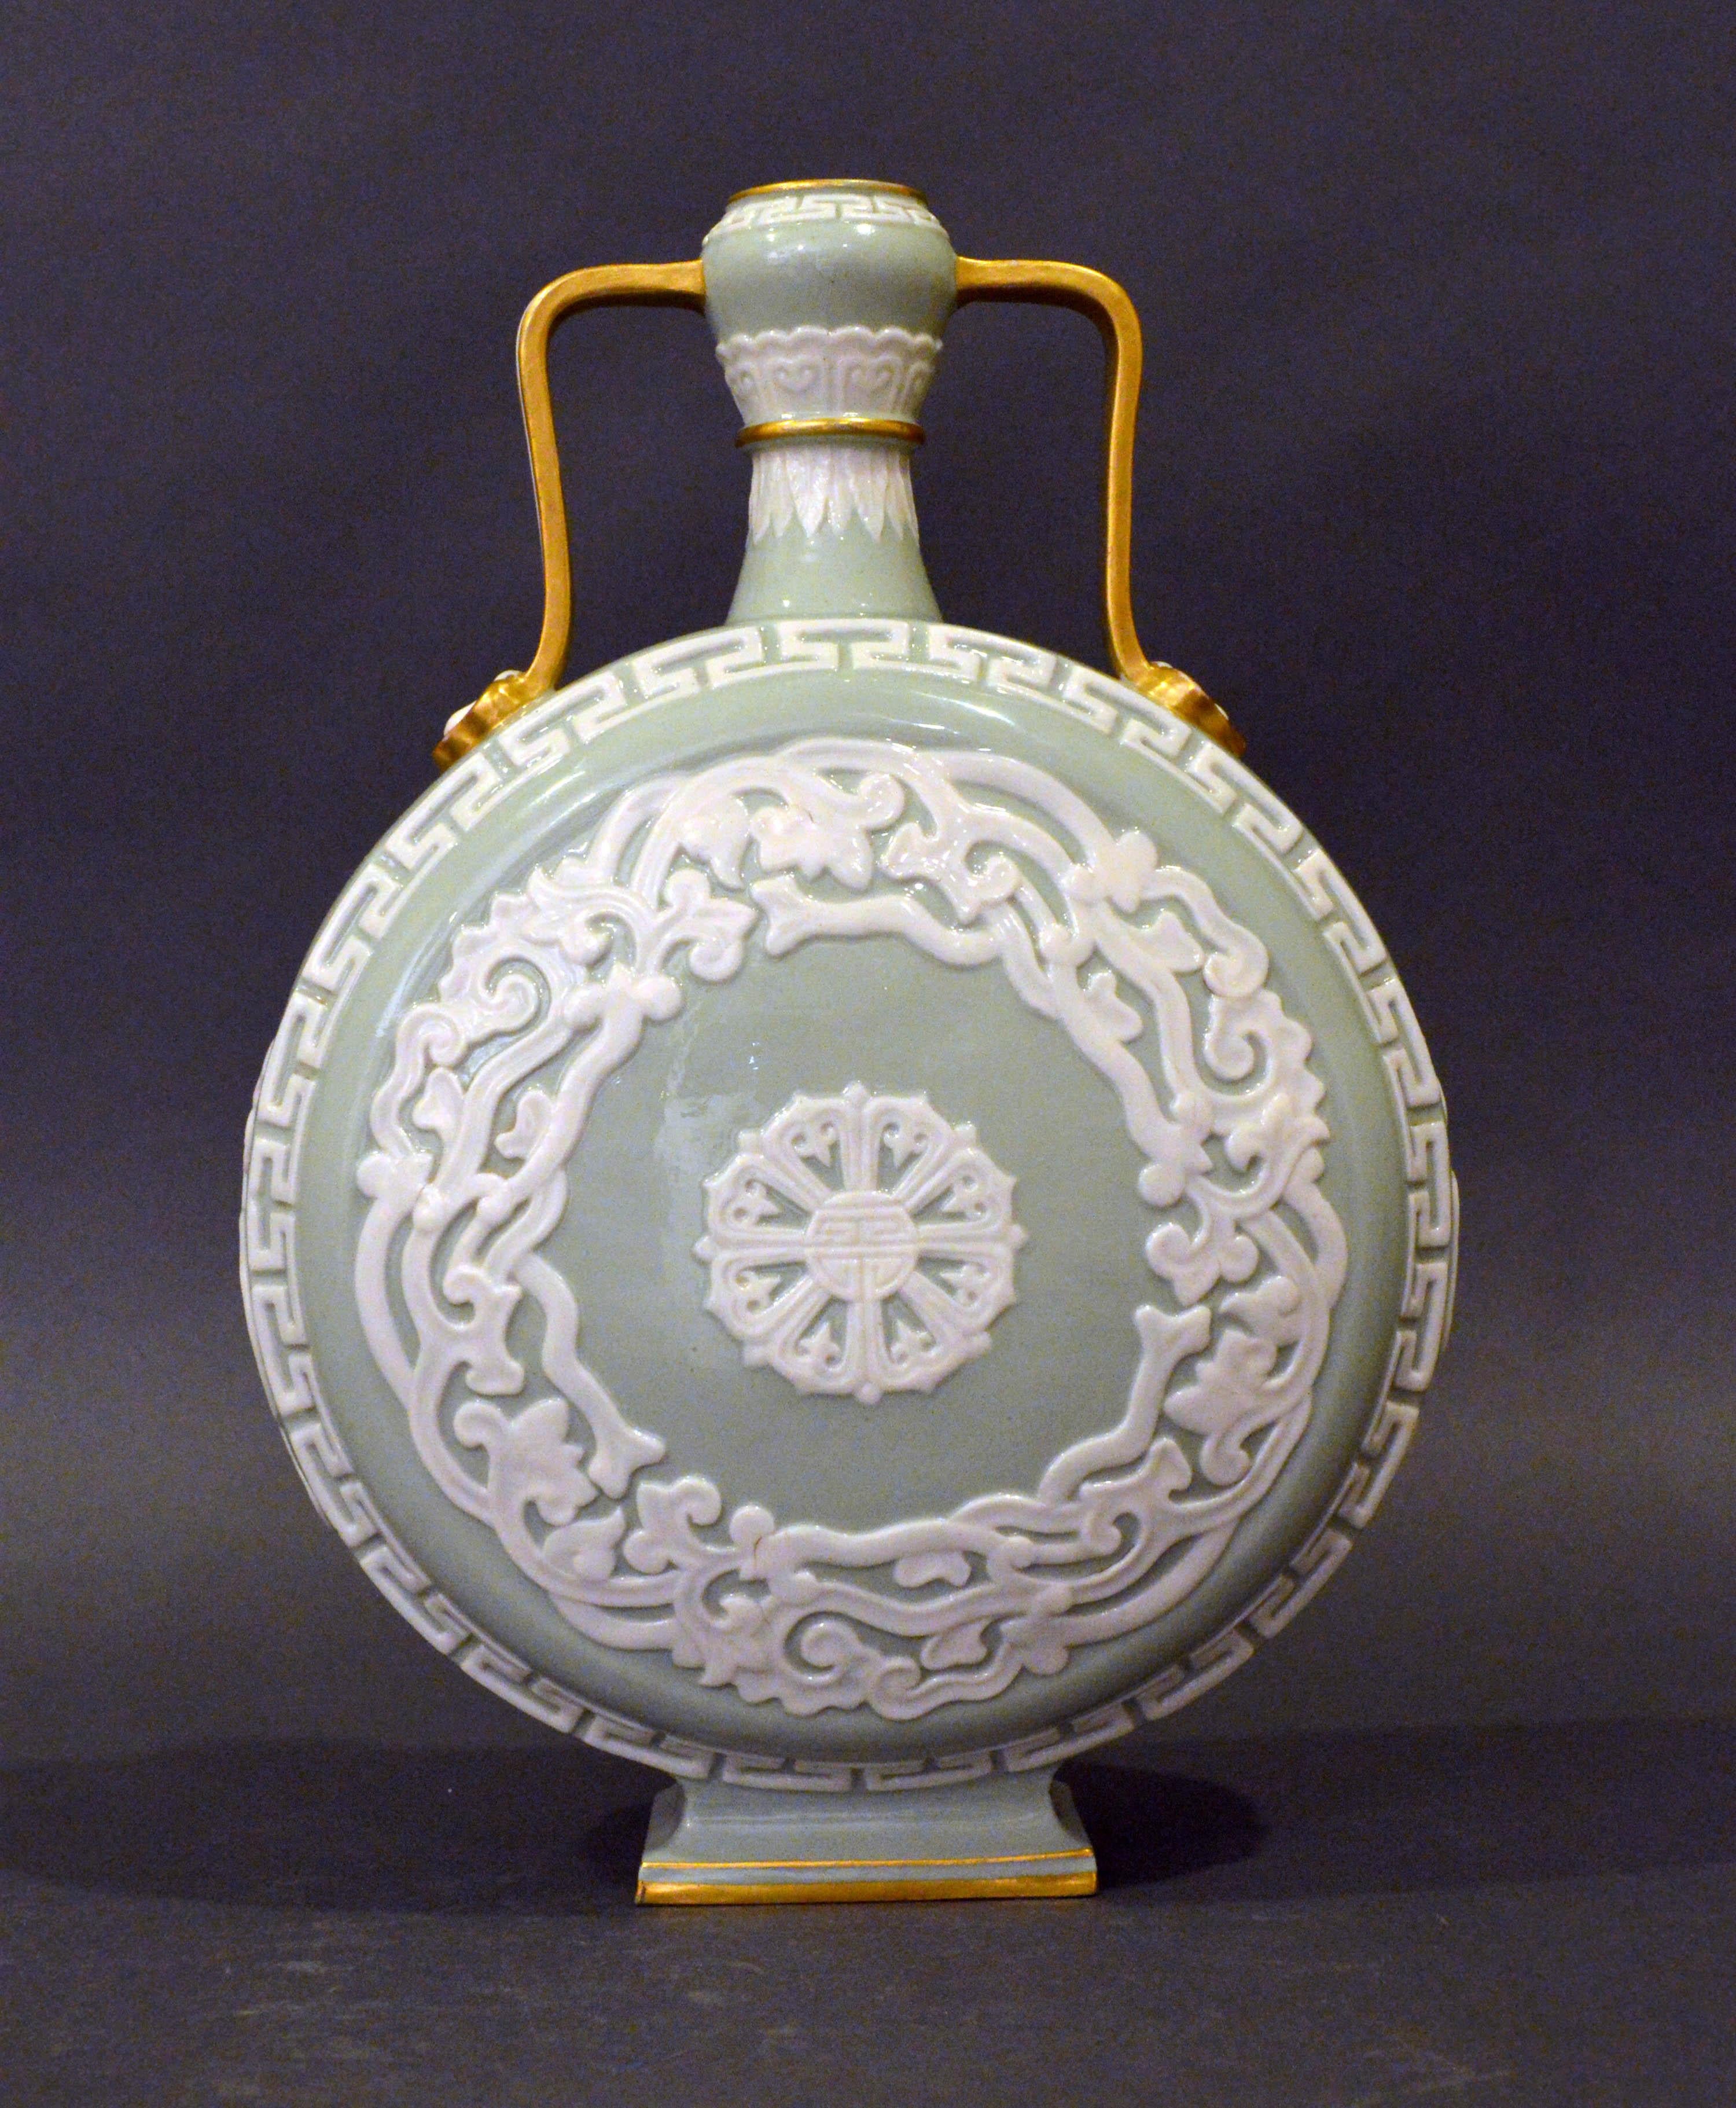 Royal Worcester porcelain moon flask,
circa 1880

Elegant Royal Worcester Porcelain chinoiserie aesthetic movement moon flask vase. A refined example of a moon flask vase in celadon green with applied white decoration and gilt covered handles.